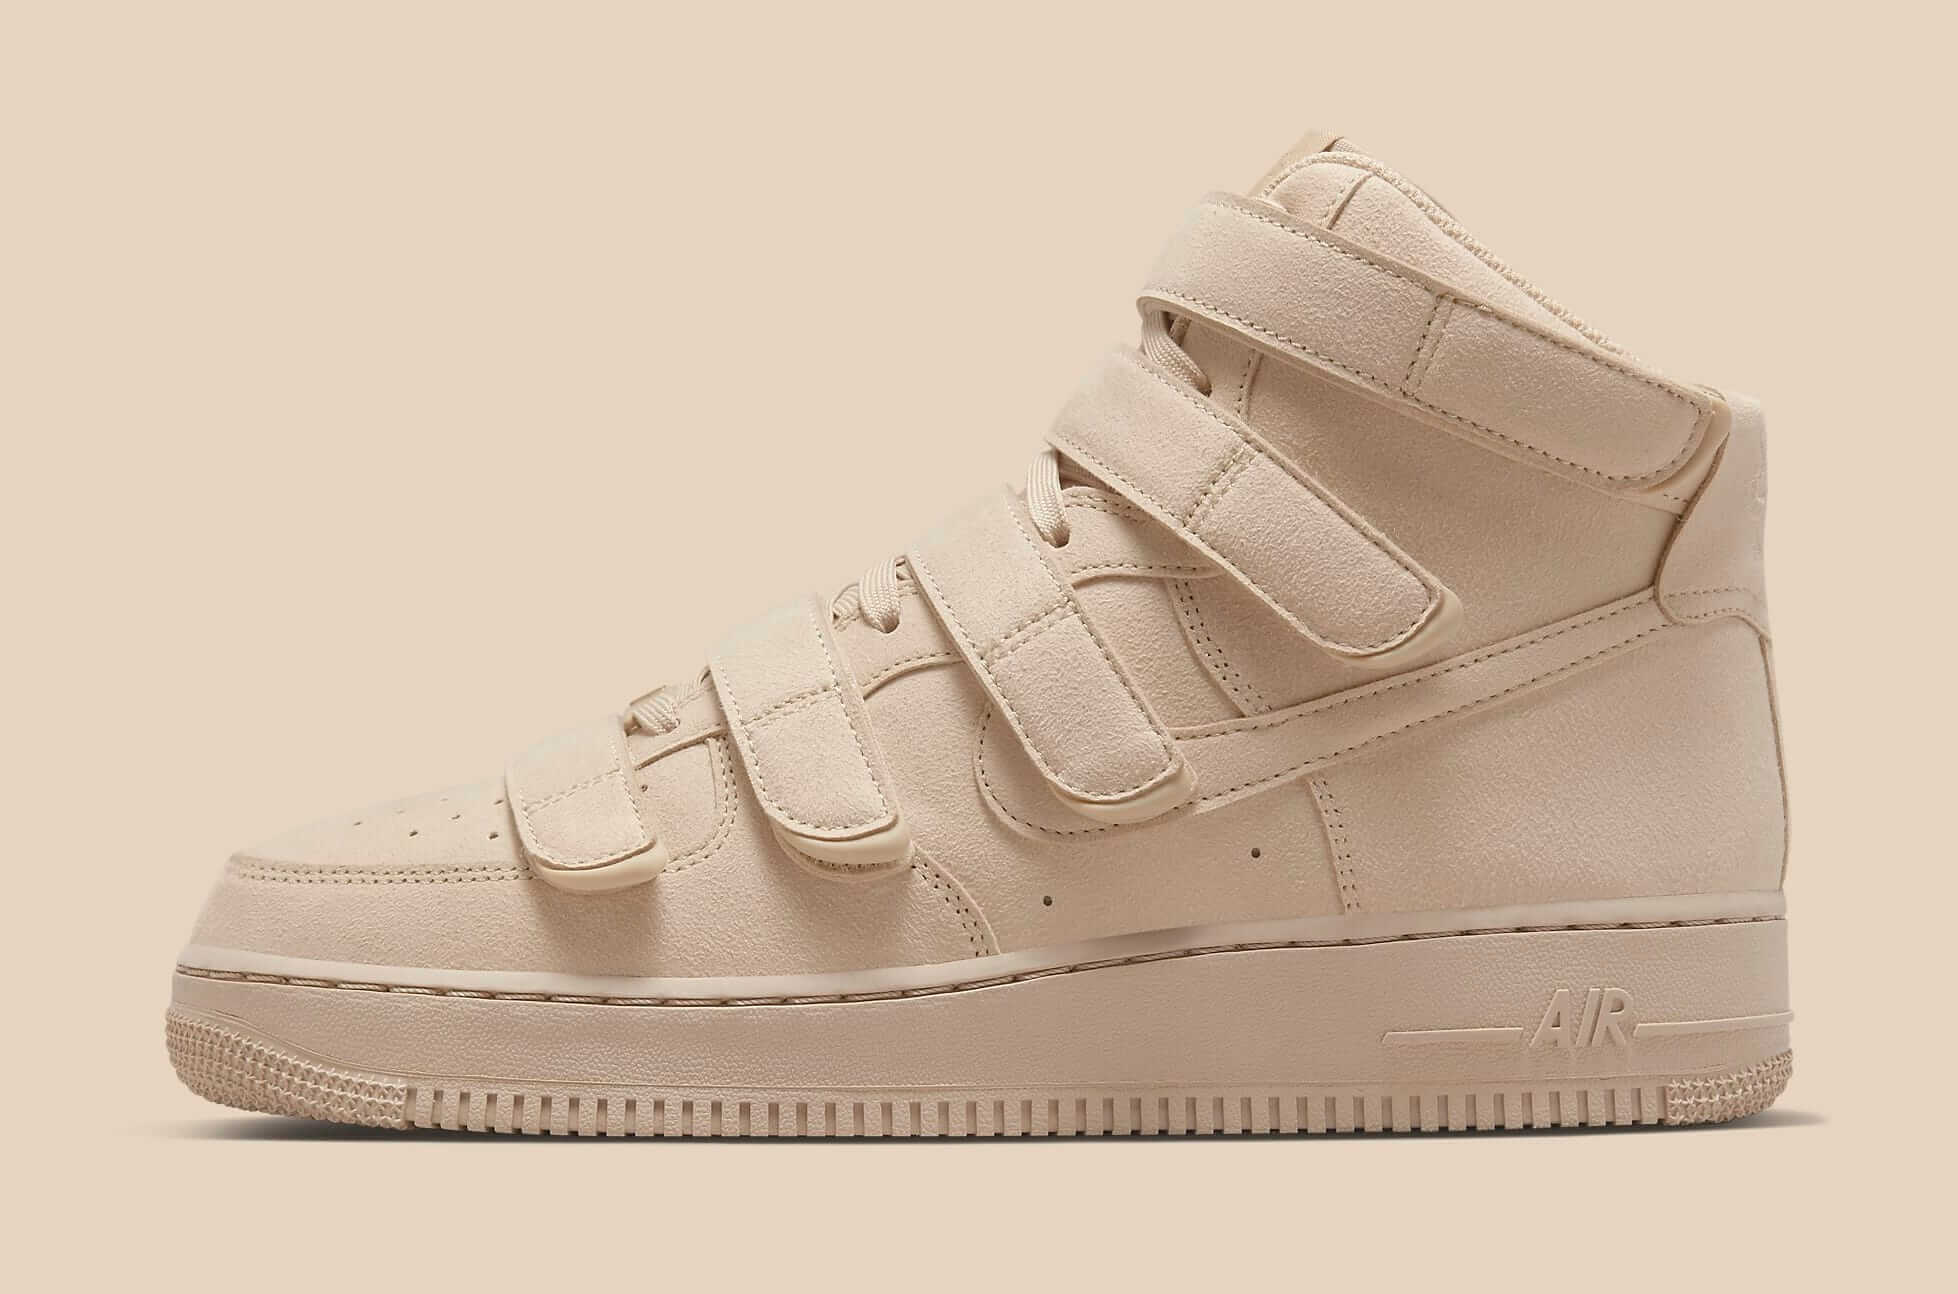 Billie Eilish Partners With Nike To Release Custom Air Force 1